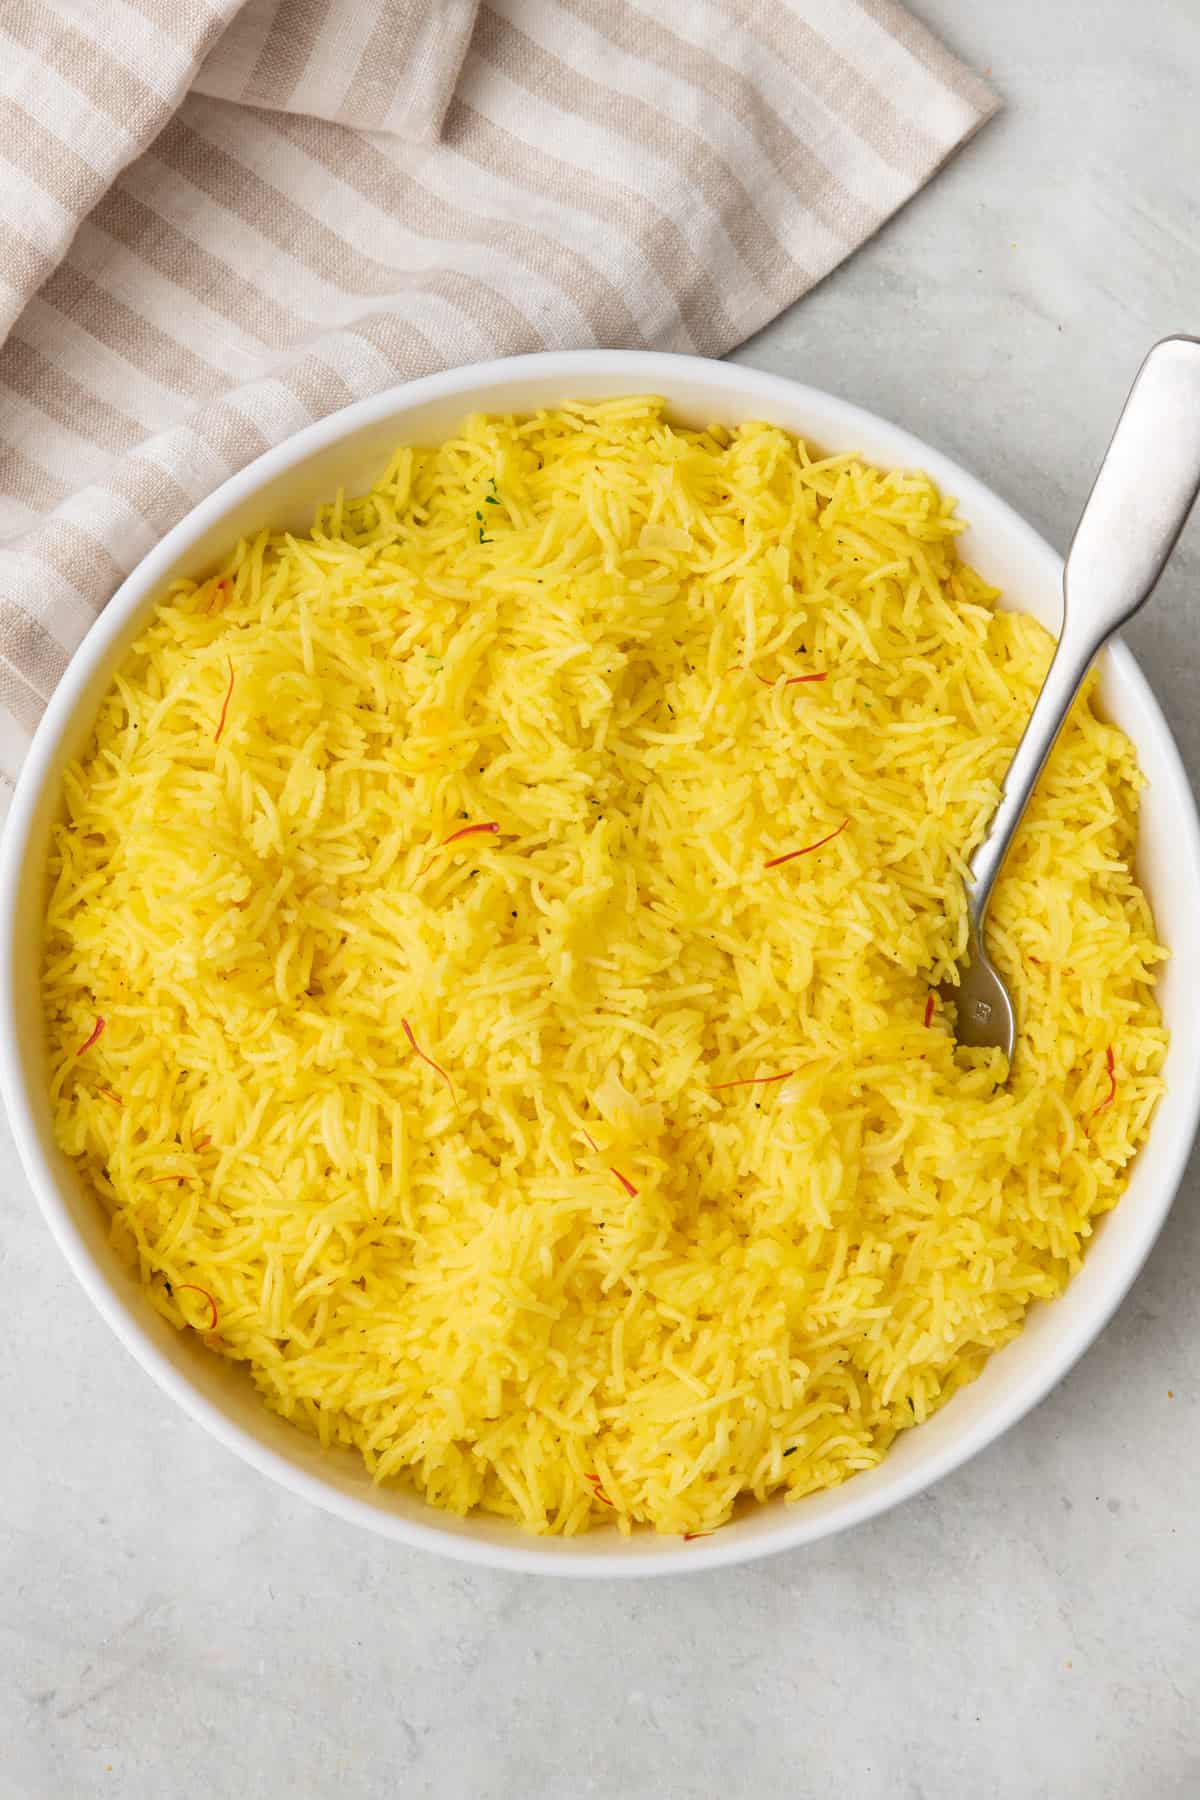 Bowl of saffron rice with a spoon dipped in.